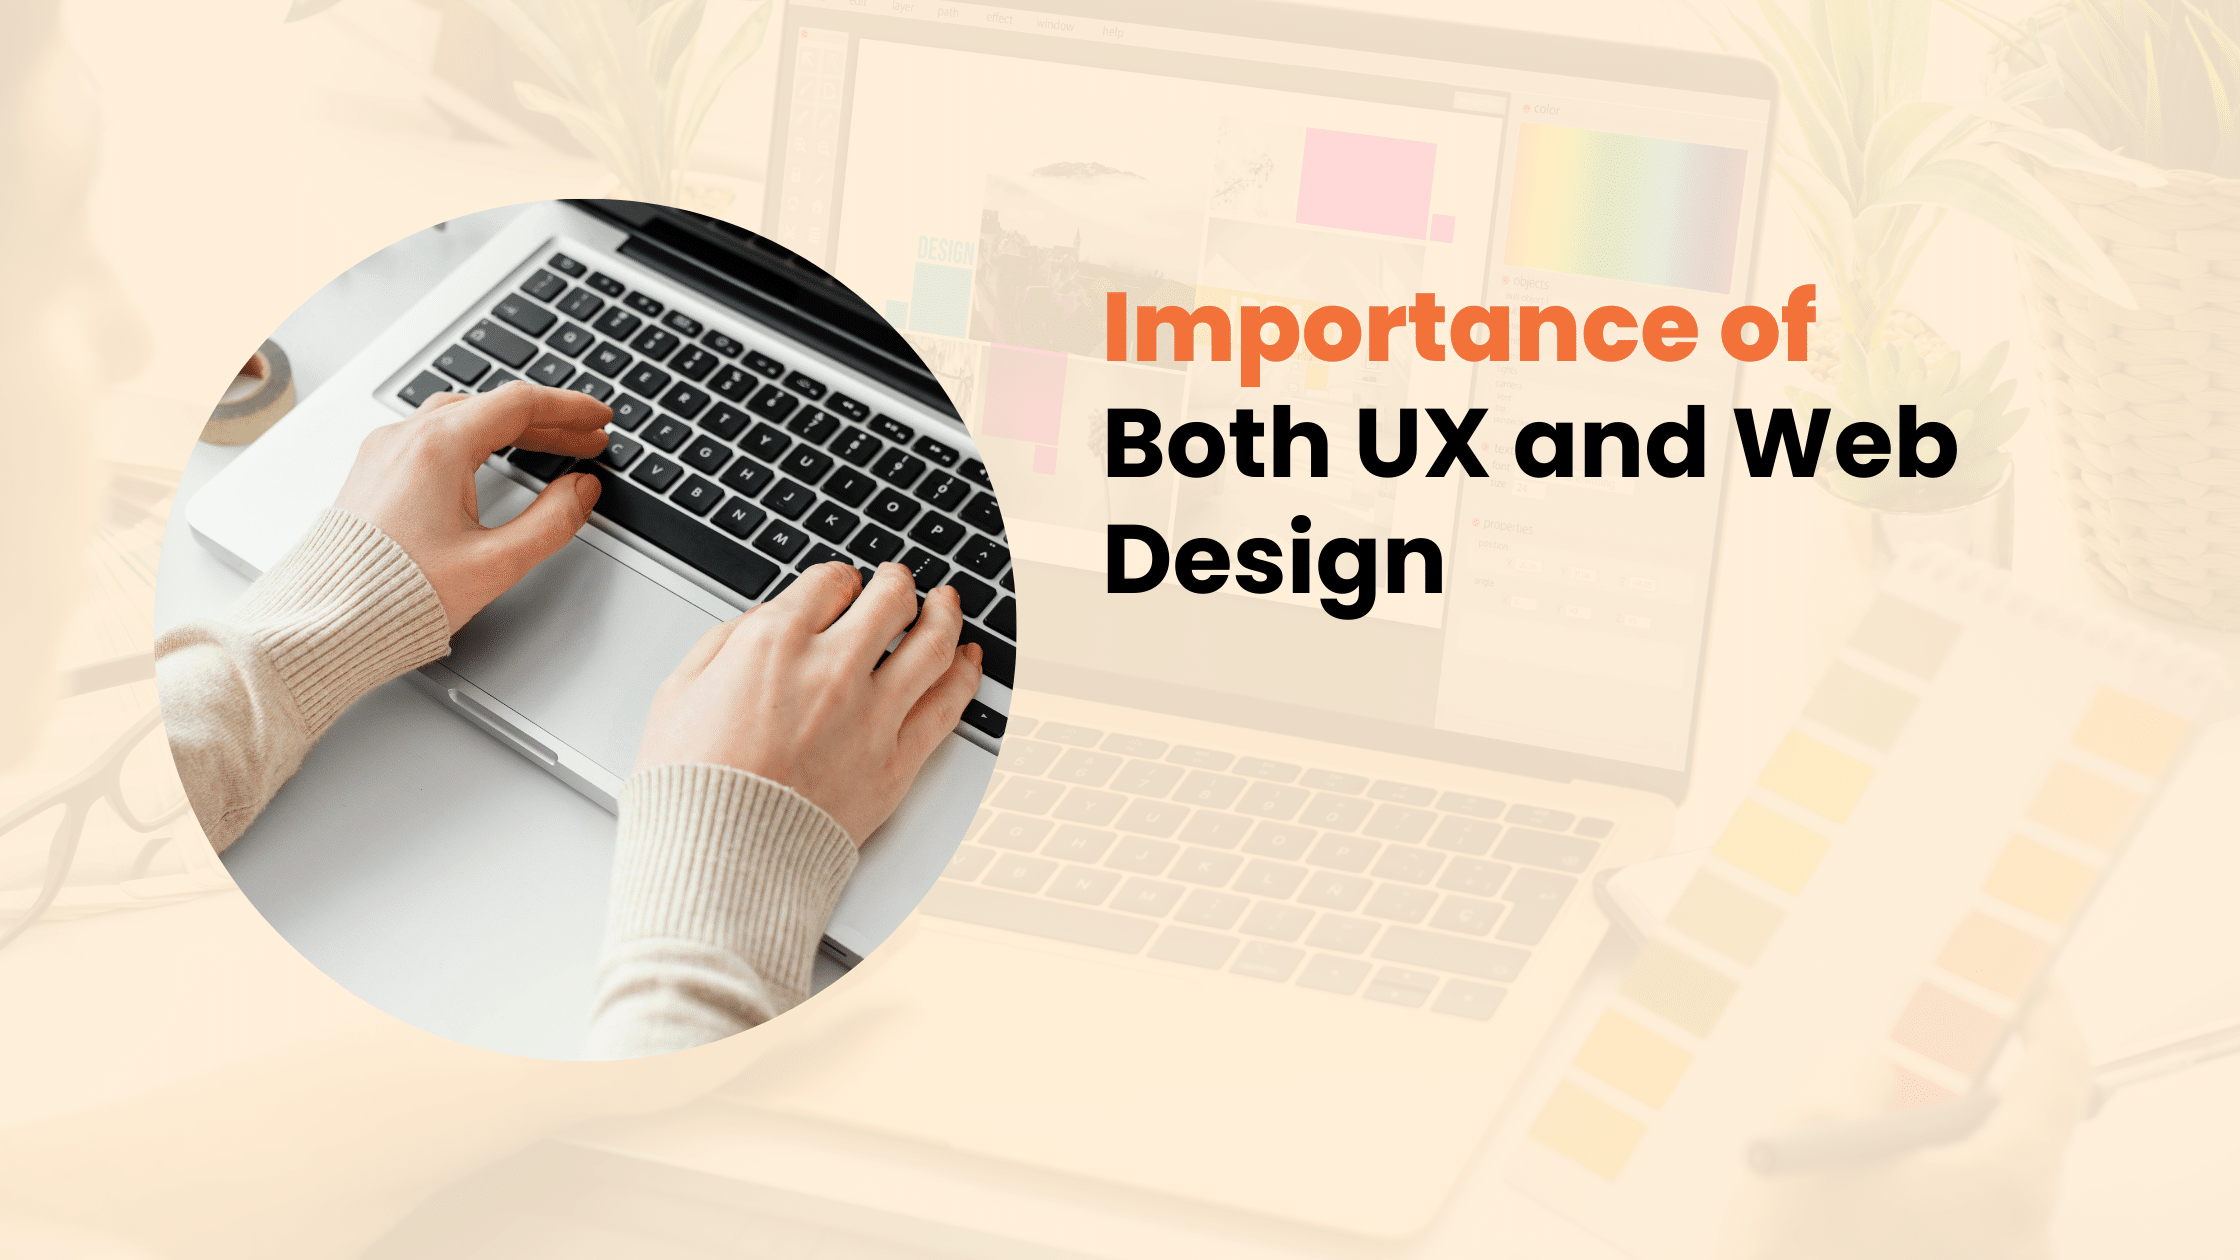 Importance of Both UX and Web Design in Modern Websites